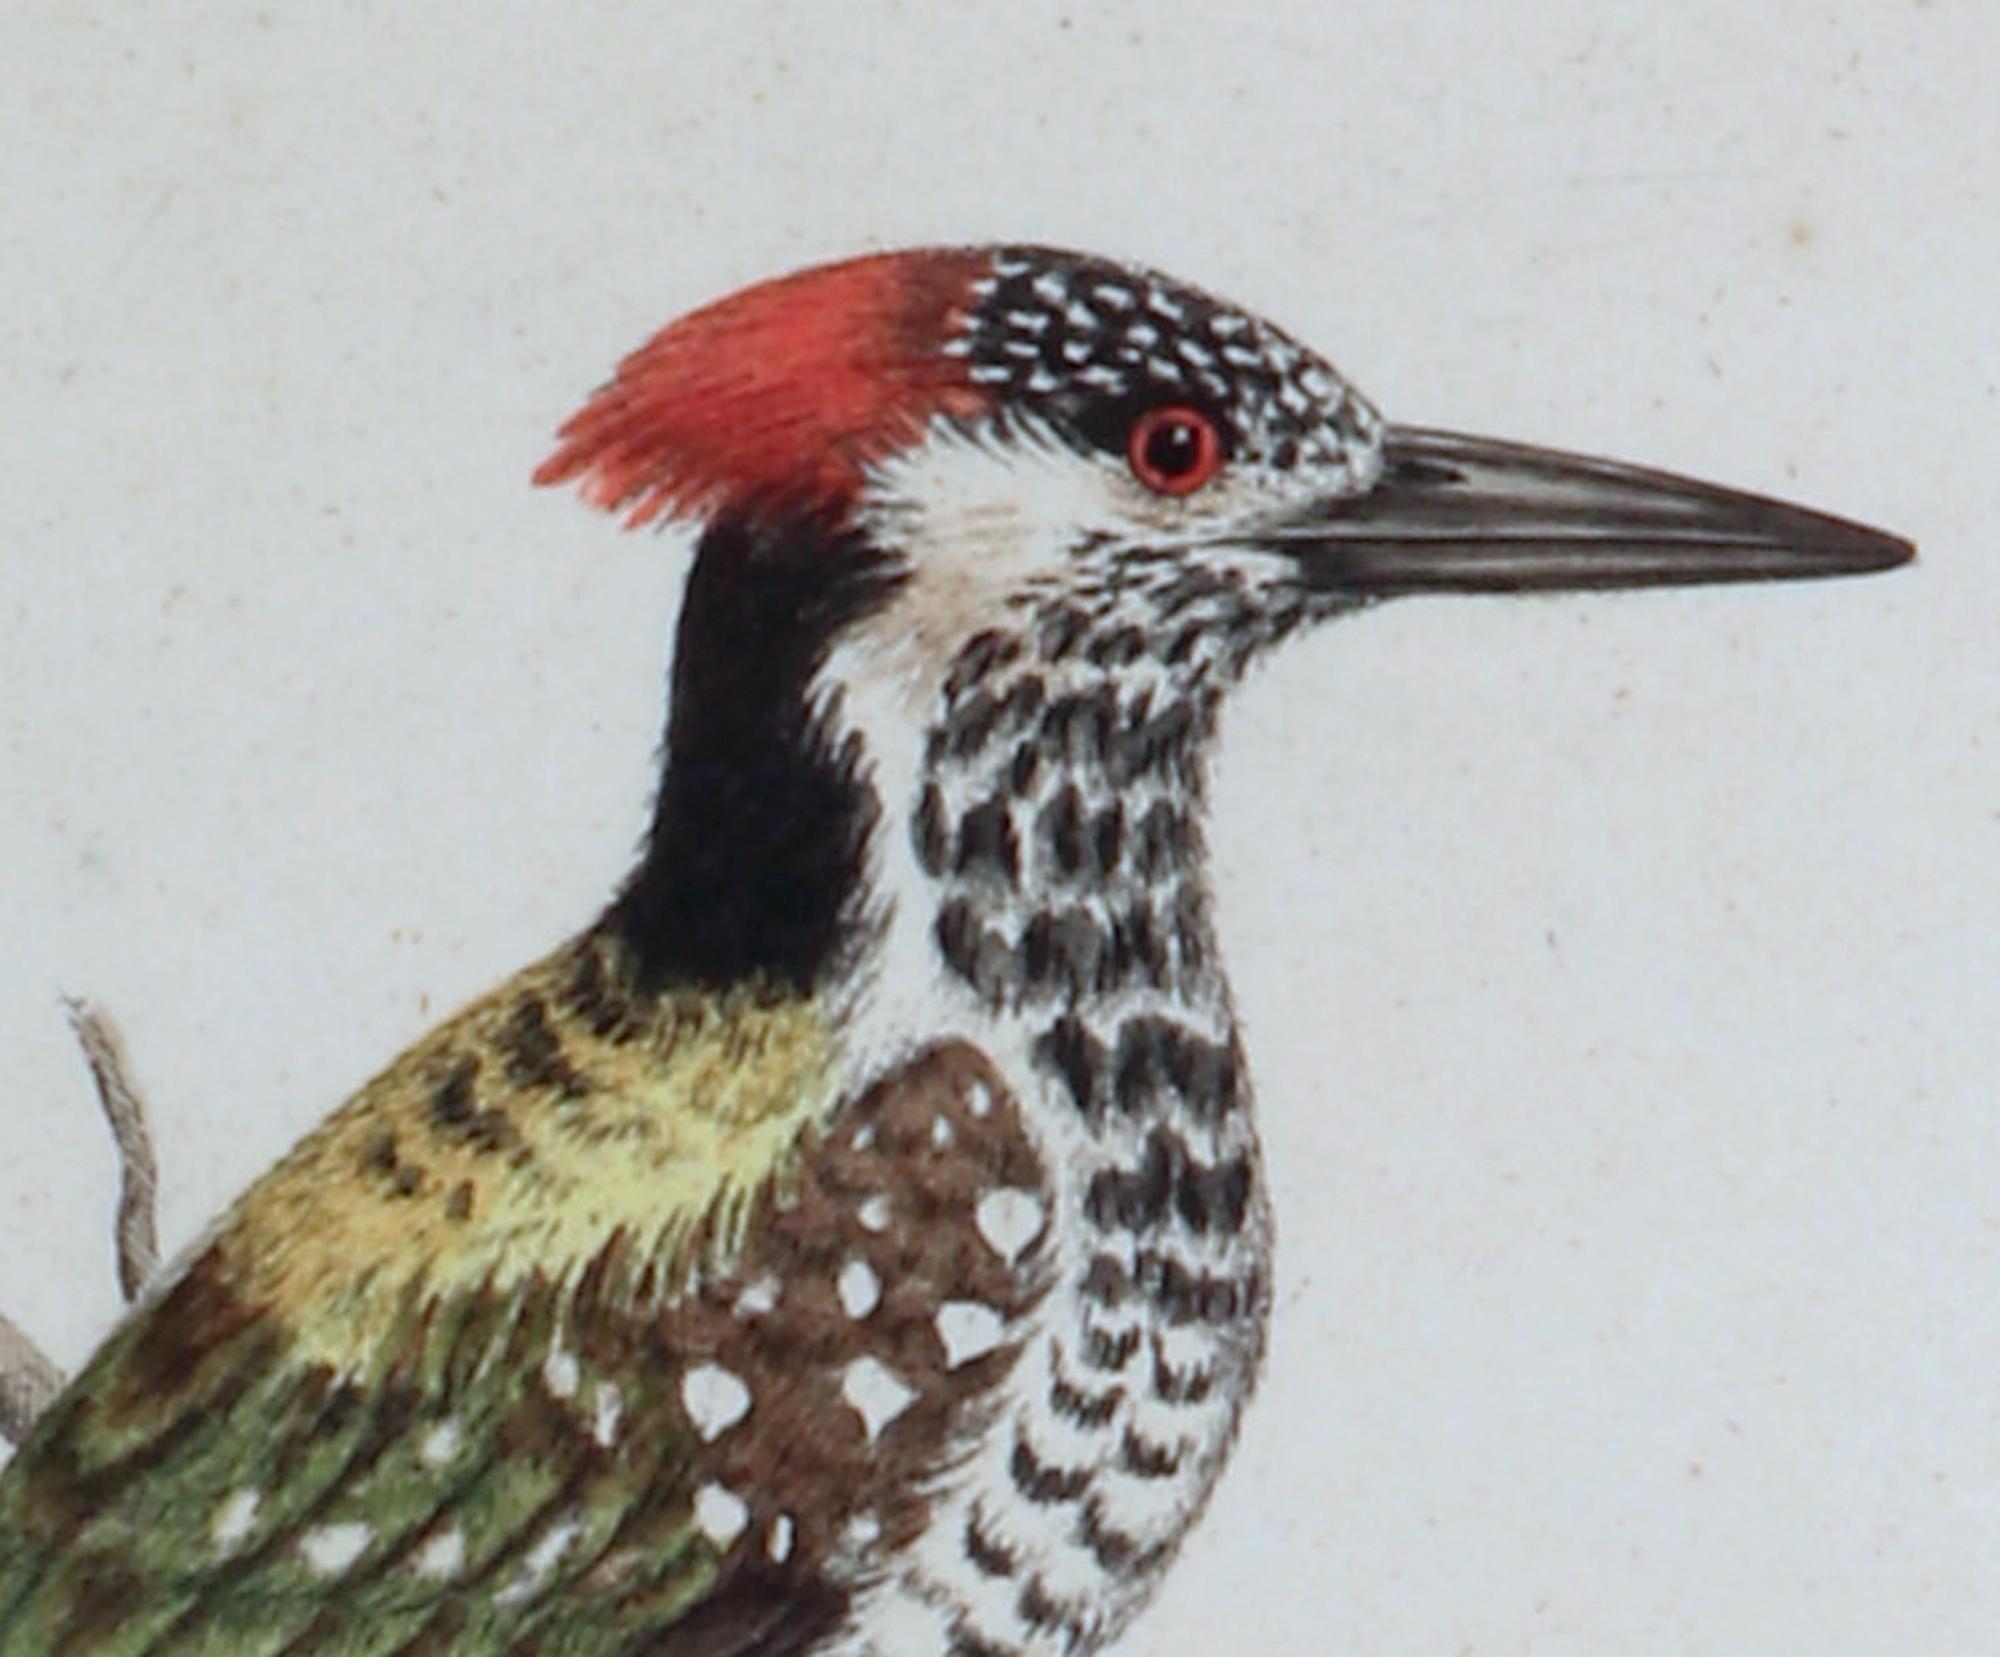 George Edwards engravings of a bird,
Woodpecker, Picus Bengalensis,
#82,
1745

A George Edwards hand-colored engraving of a Woodpecker in a decoupage frame.

Dimensions: 16 3/4 inches x 14 inches wide x 1 inch deep.